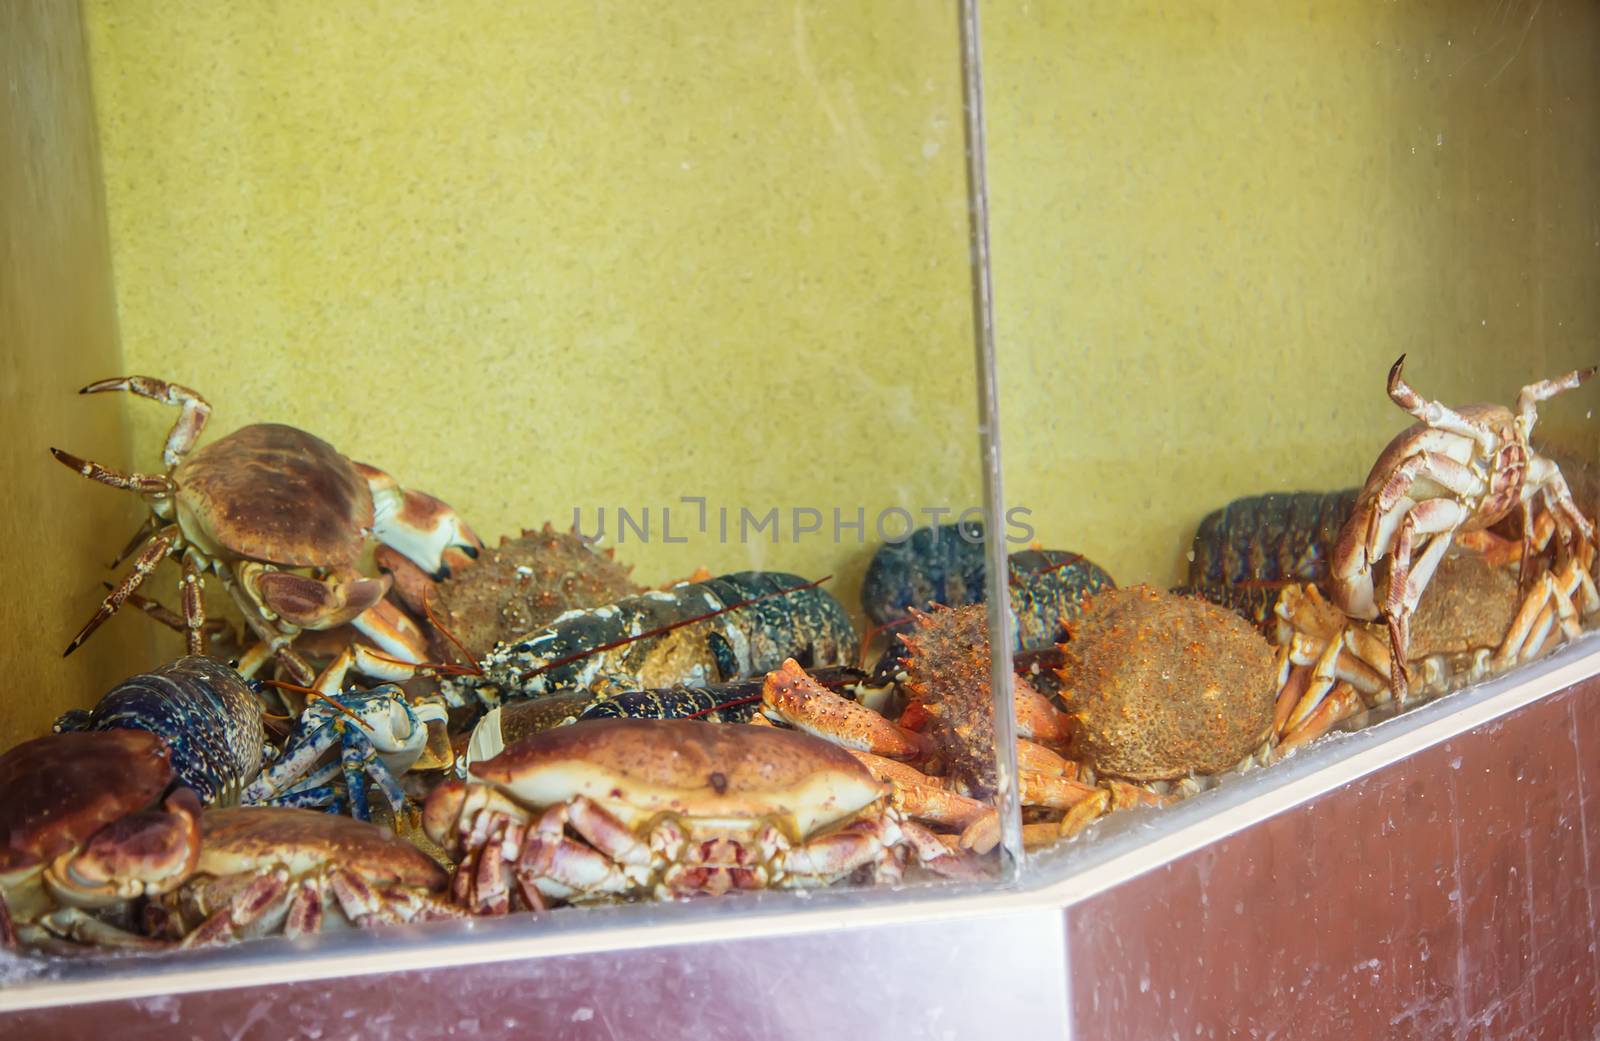 Crab with lobster in fishpond at fish market by pixinoo